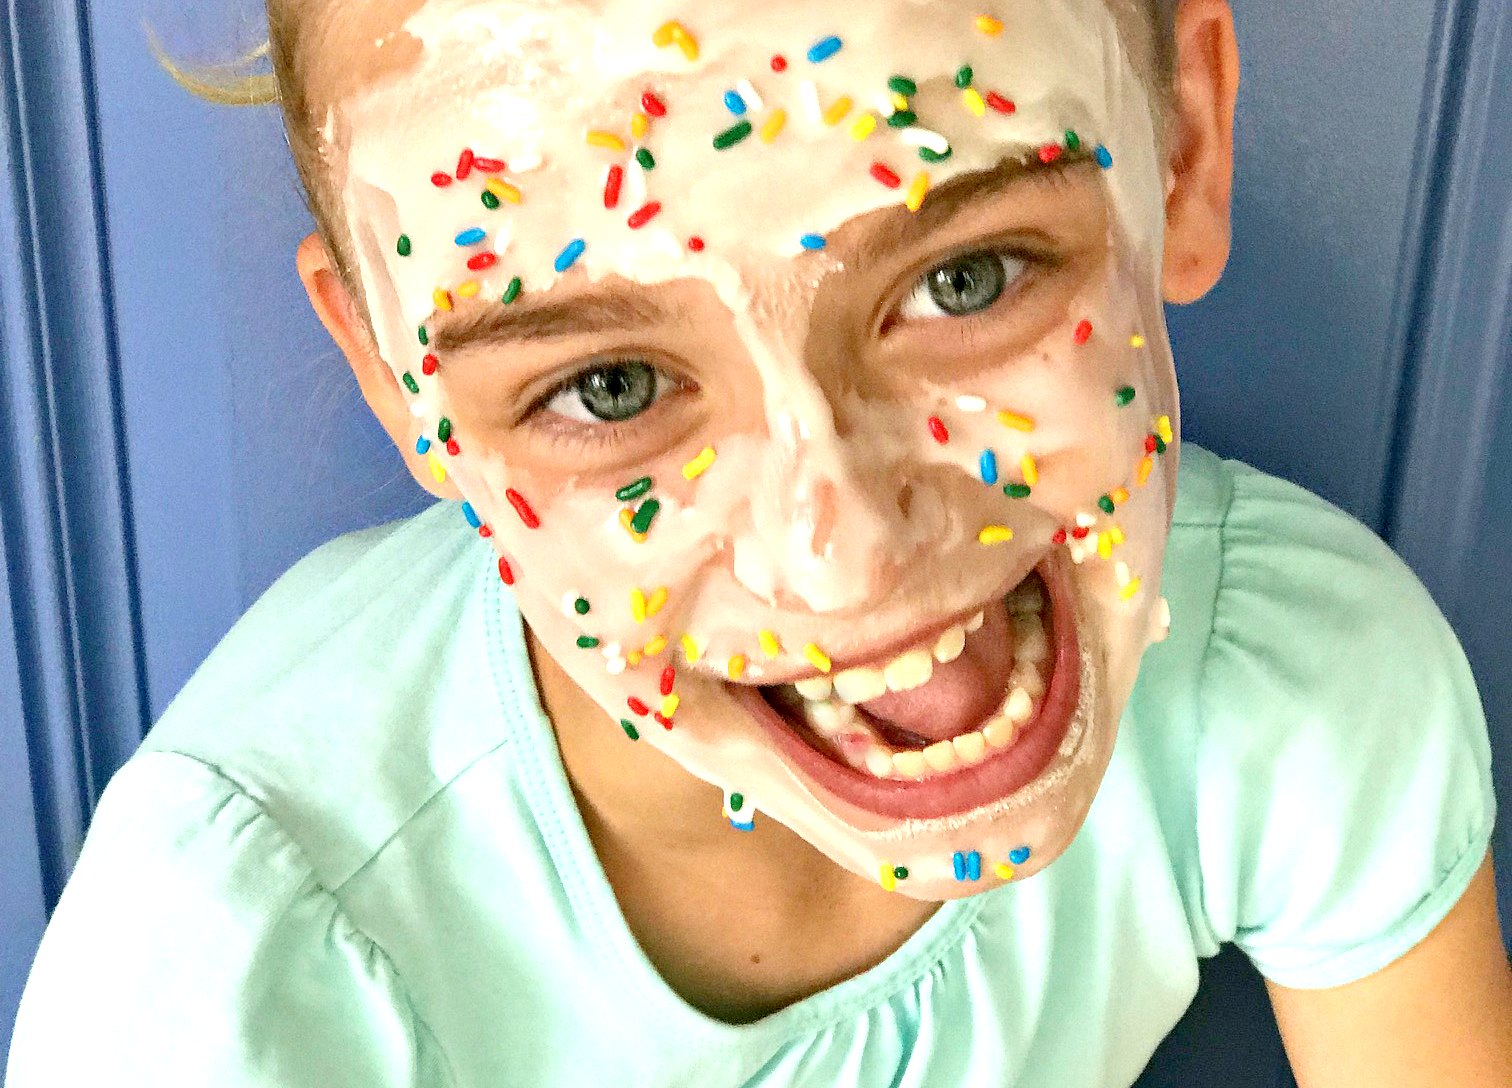 Whether you're throwing a spa birthday party or just want some fun relaxation time with your kids, this DIY edible face mask is sure to make any little girl (or little boy, if we're being honest) super excited for some pampering. Inspired by the Sunny Day preschool series on Nickelodeon, you can follow the simple and easy recipe to make it yourself, or you can just grab a jar next time you're at the grocery store. And it tastes good too! #spaday #kids #parenting #facemask #recipe #edible #diyfacemask #sunnyday